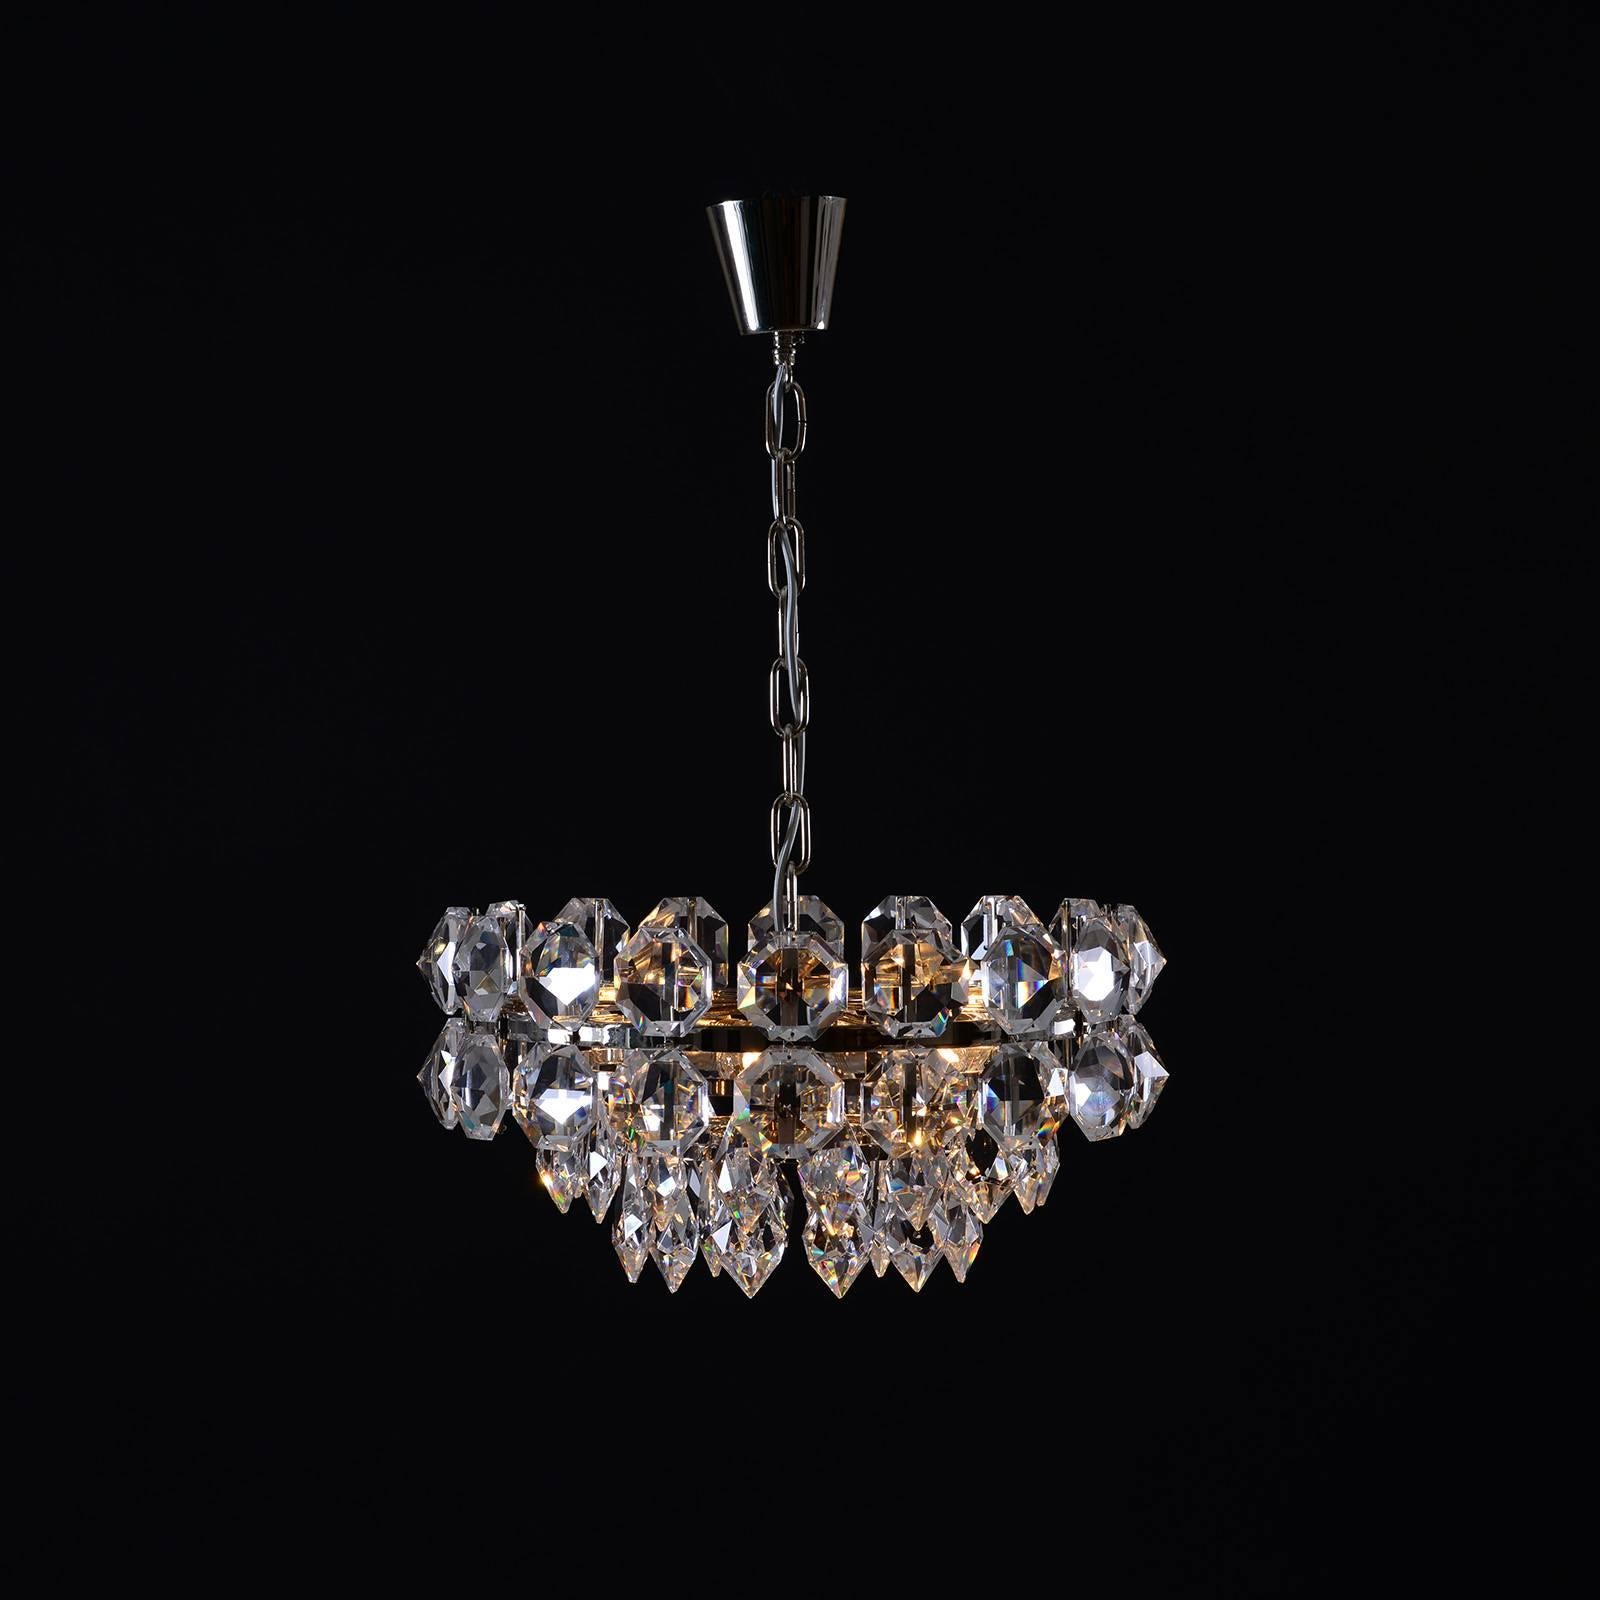 A very nice charming chandelier with wonderful very big hand-cut crystal-glass-stones
several variations available - total drop to be determined

Most components according to the UL regulations, with an additional charge we will UL-list and label 
 